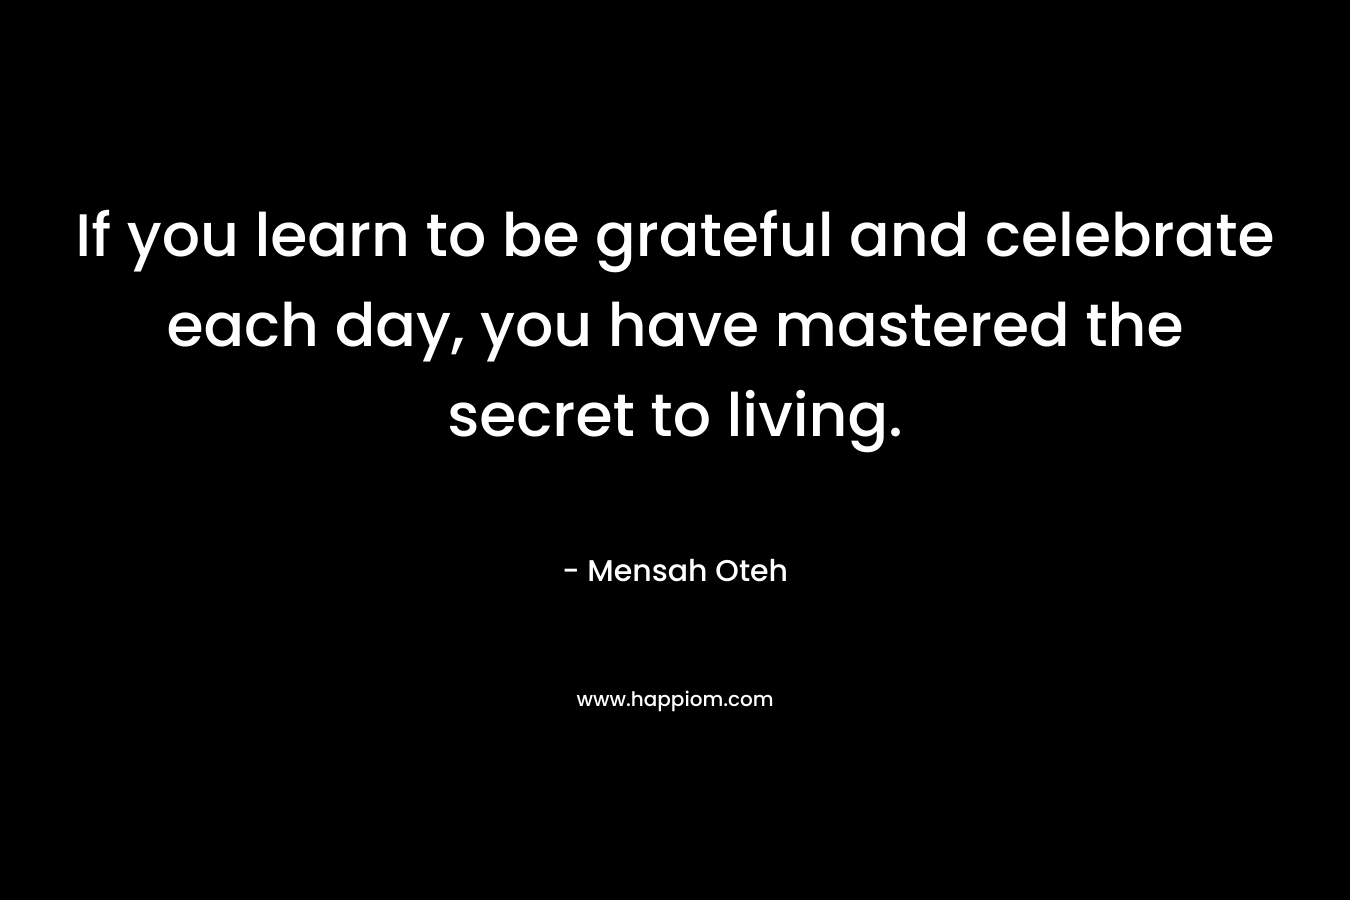 If you learn to be grateful and celebrate each day, you have mastered the secret to living.